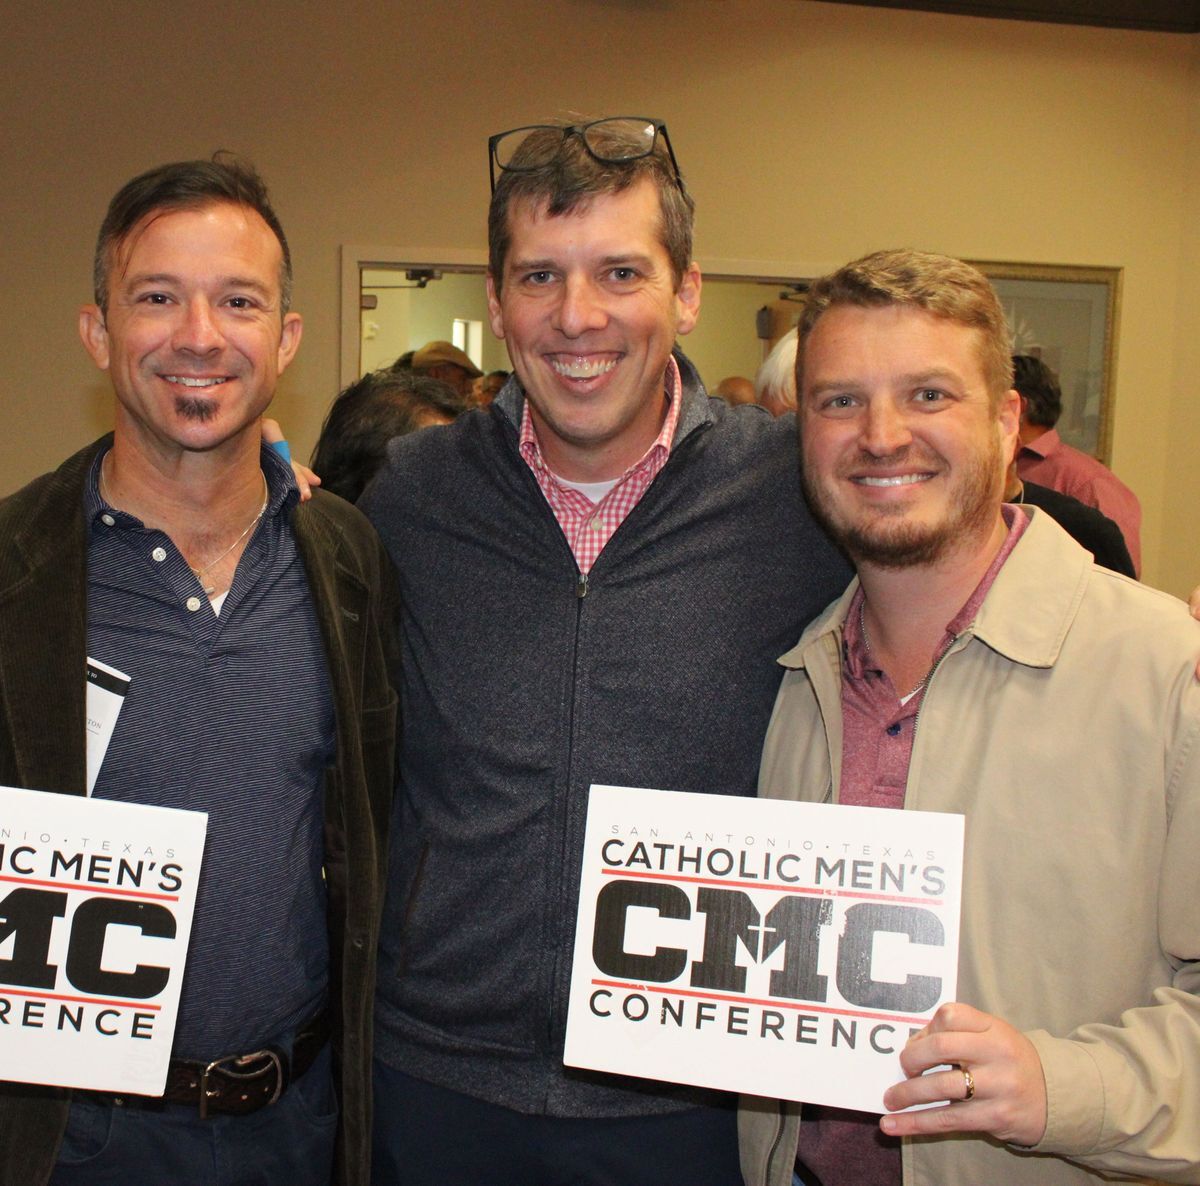 Men friends smiling together pose for a group photo holding logo signs at the conference